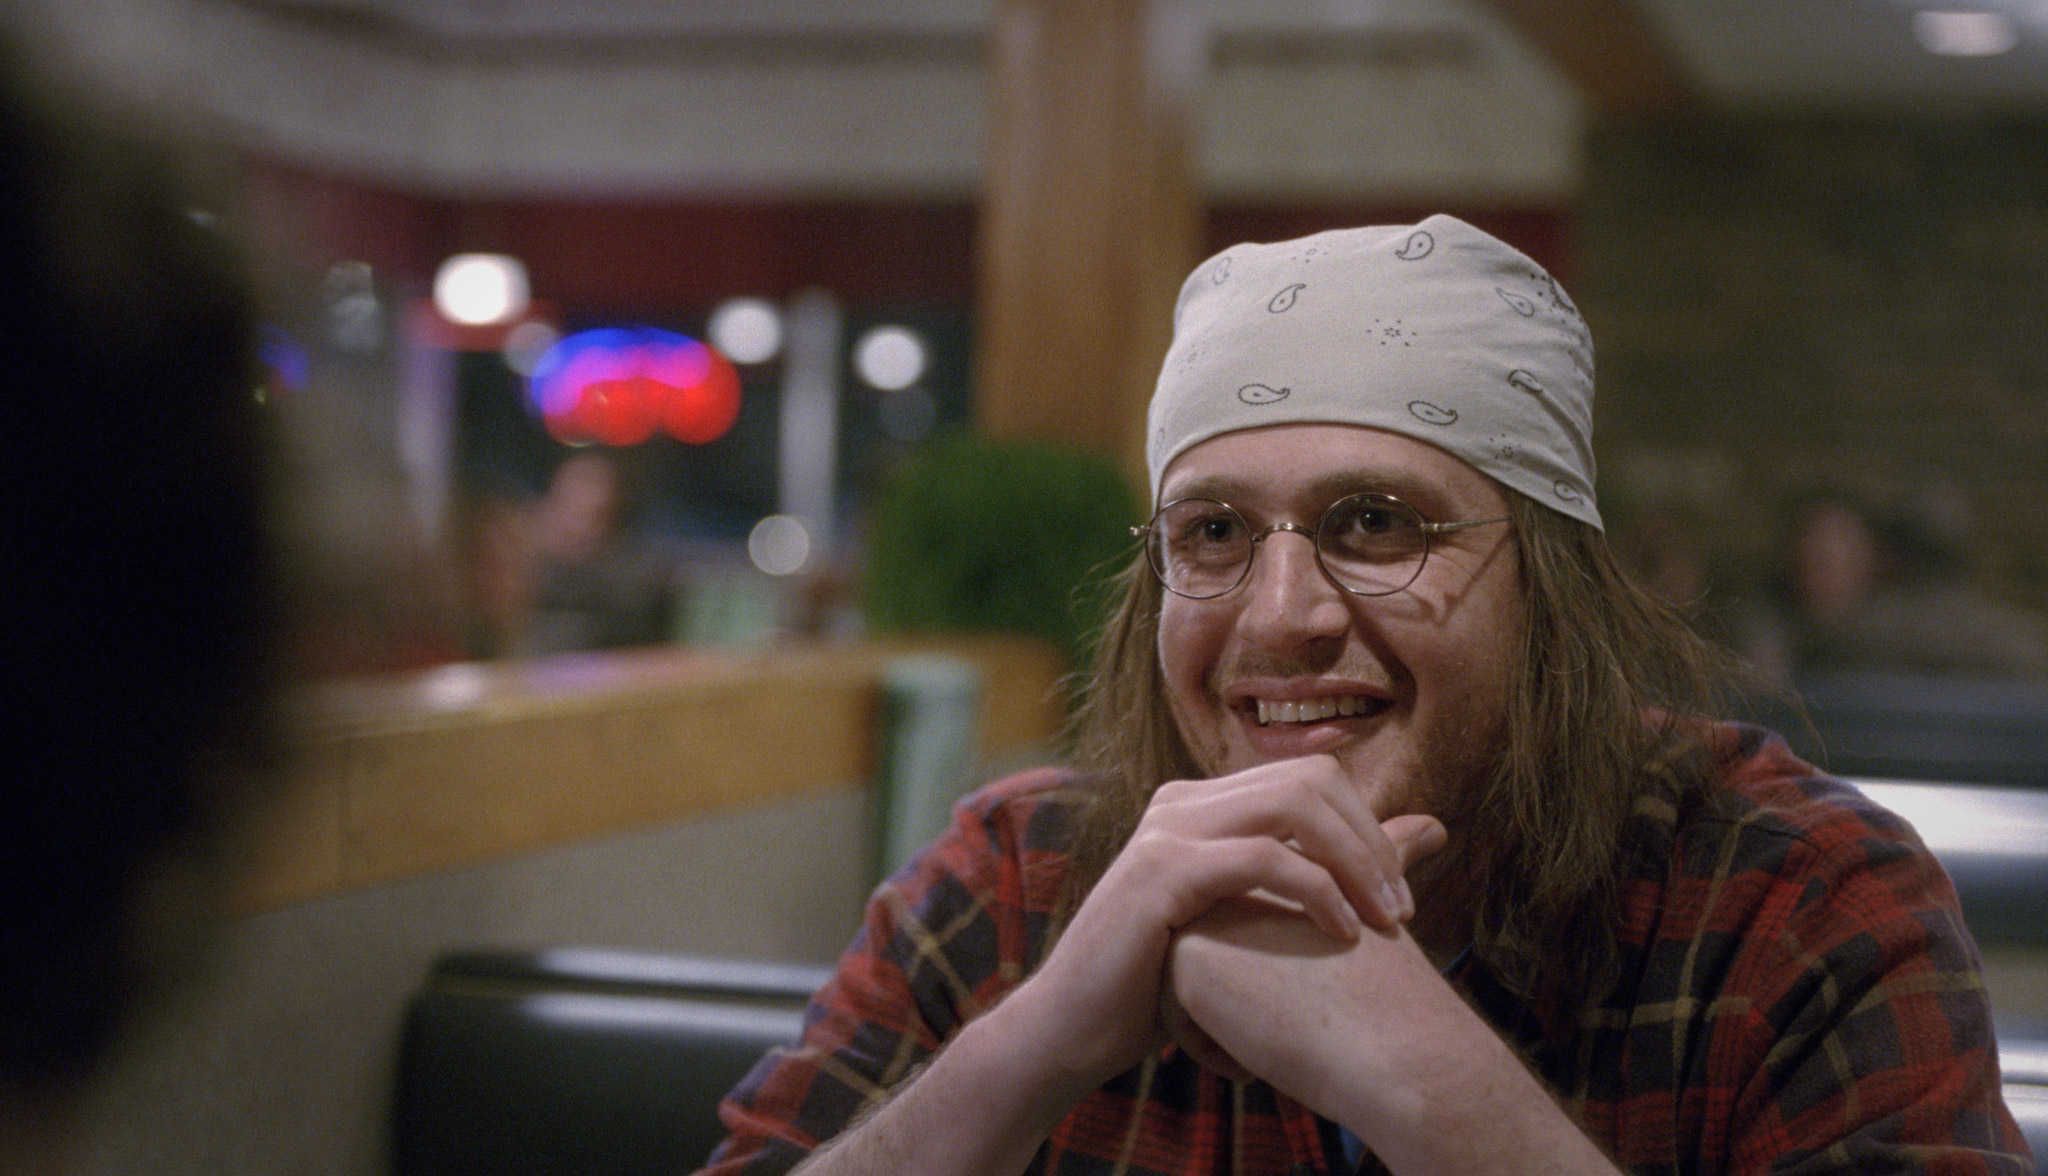 Jason Segel as David Foster Wallace in "The End of the Tour"